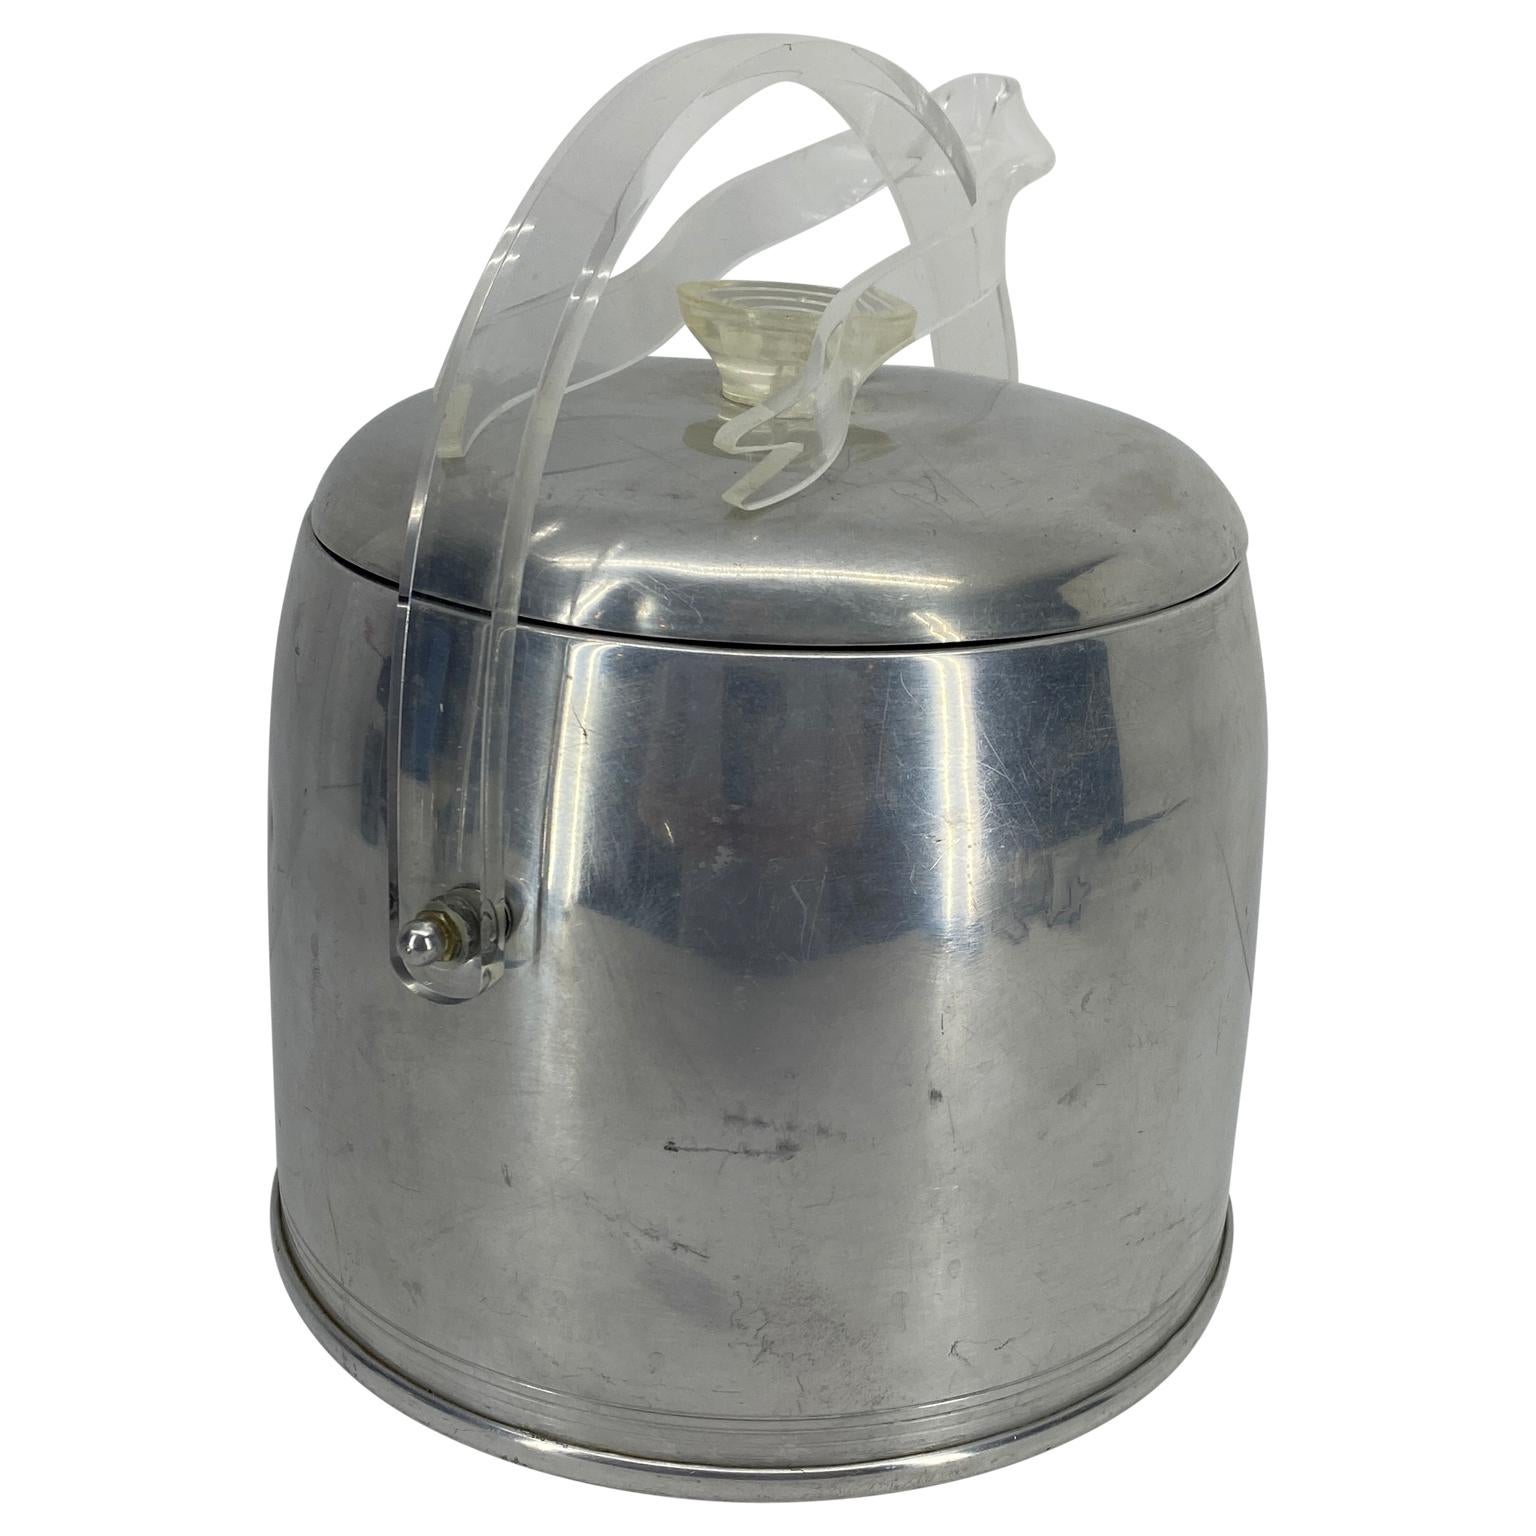 Vintage aluminum ice bucket and Lucite tongs.